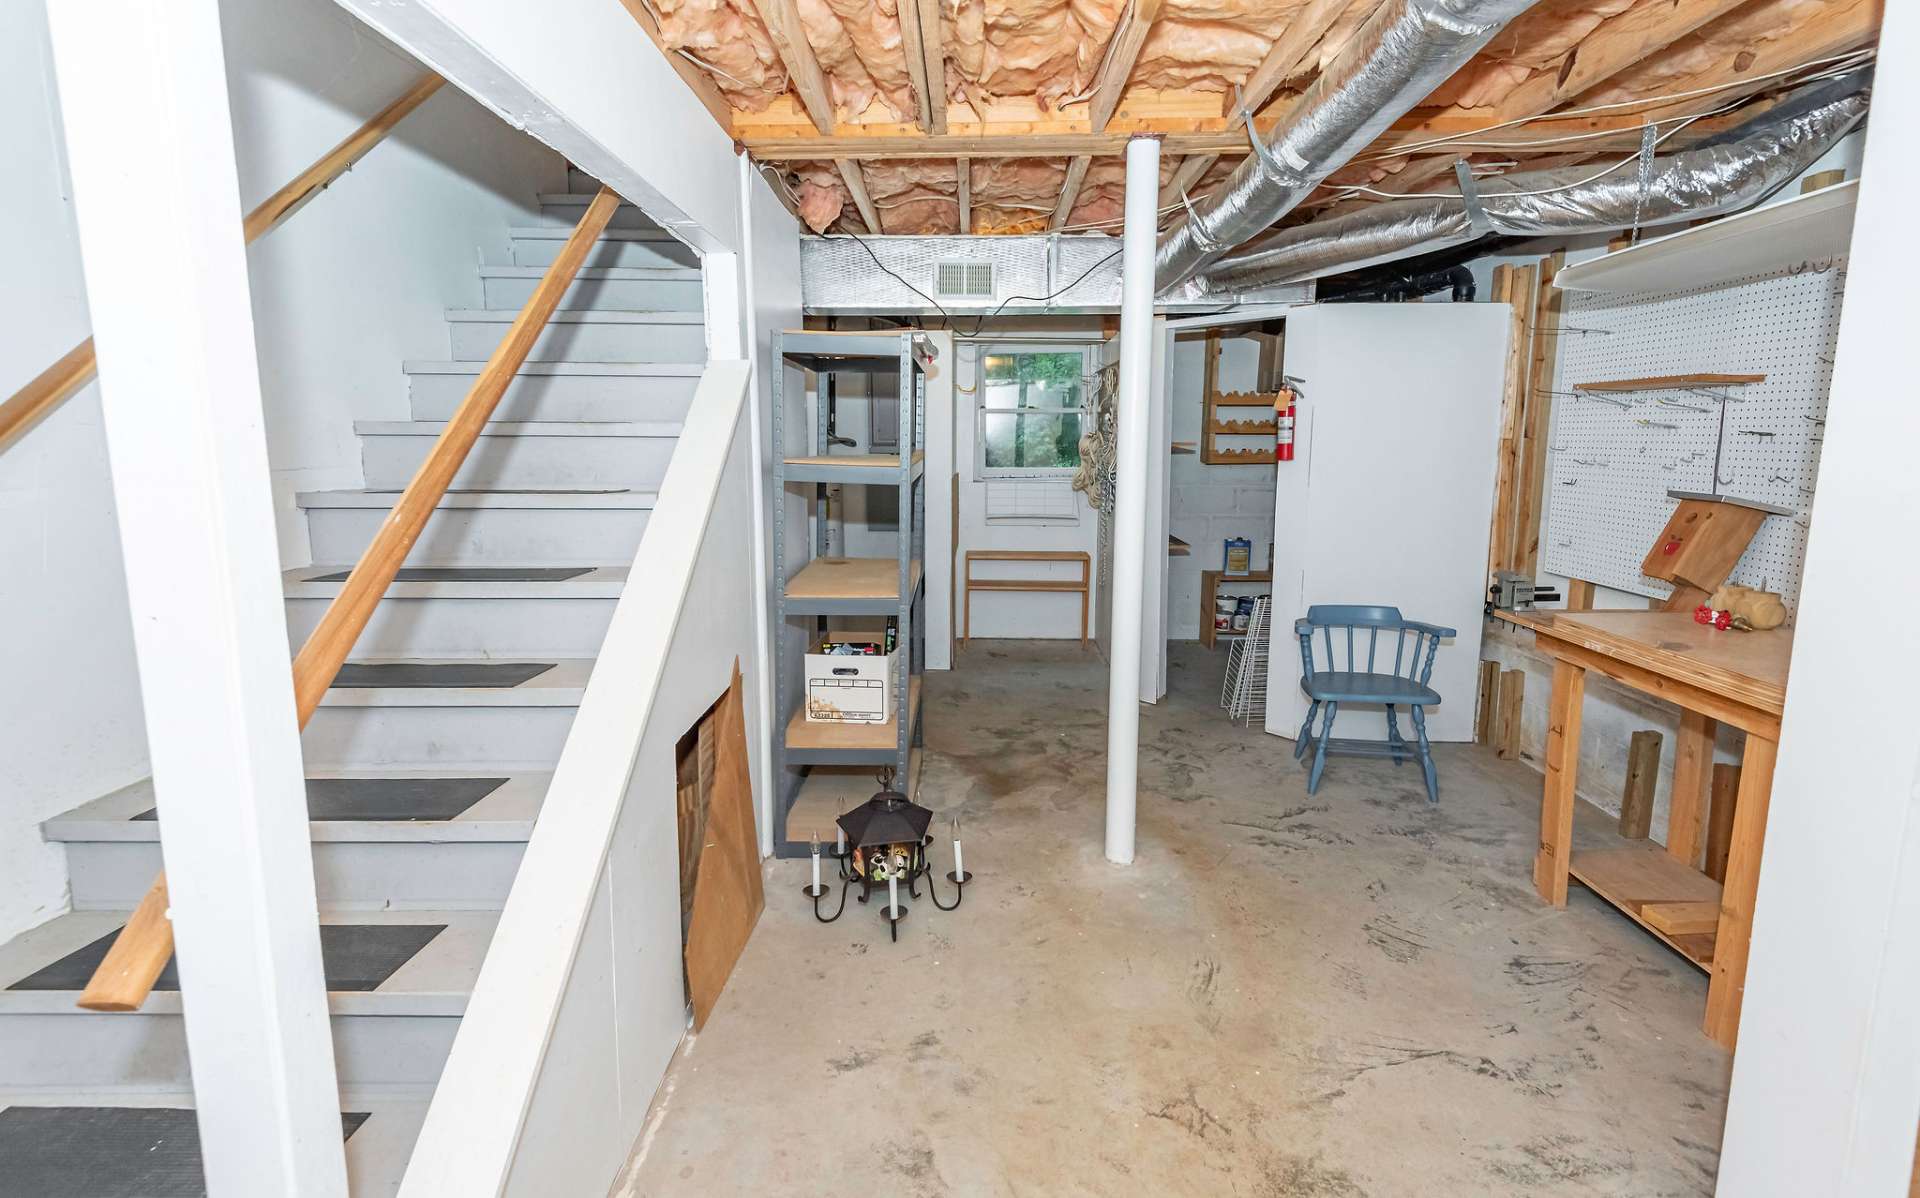 The lower level offers lots of work and storage space, along with finished space.